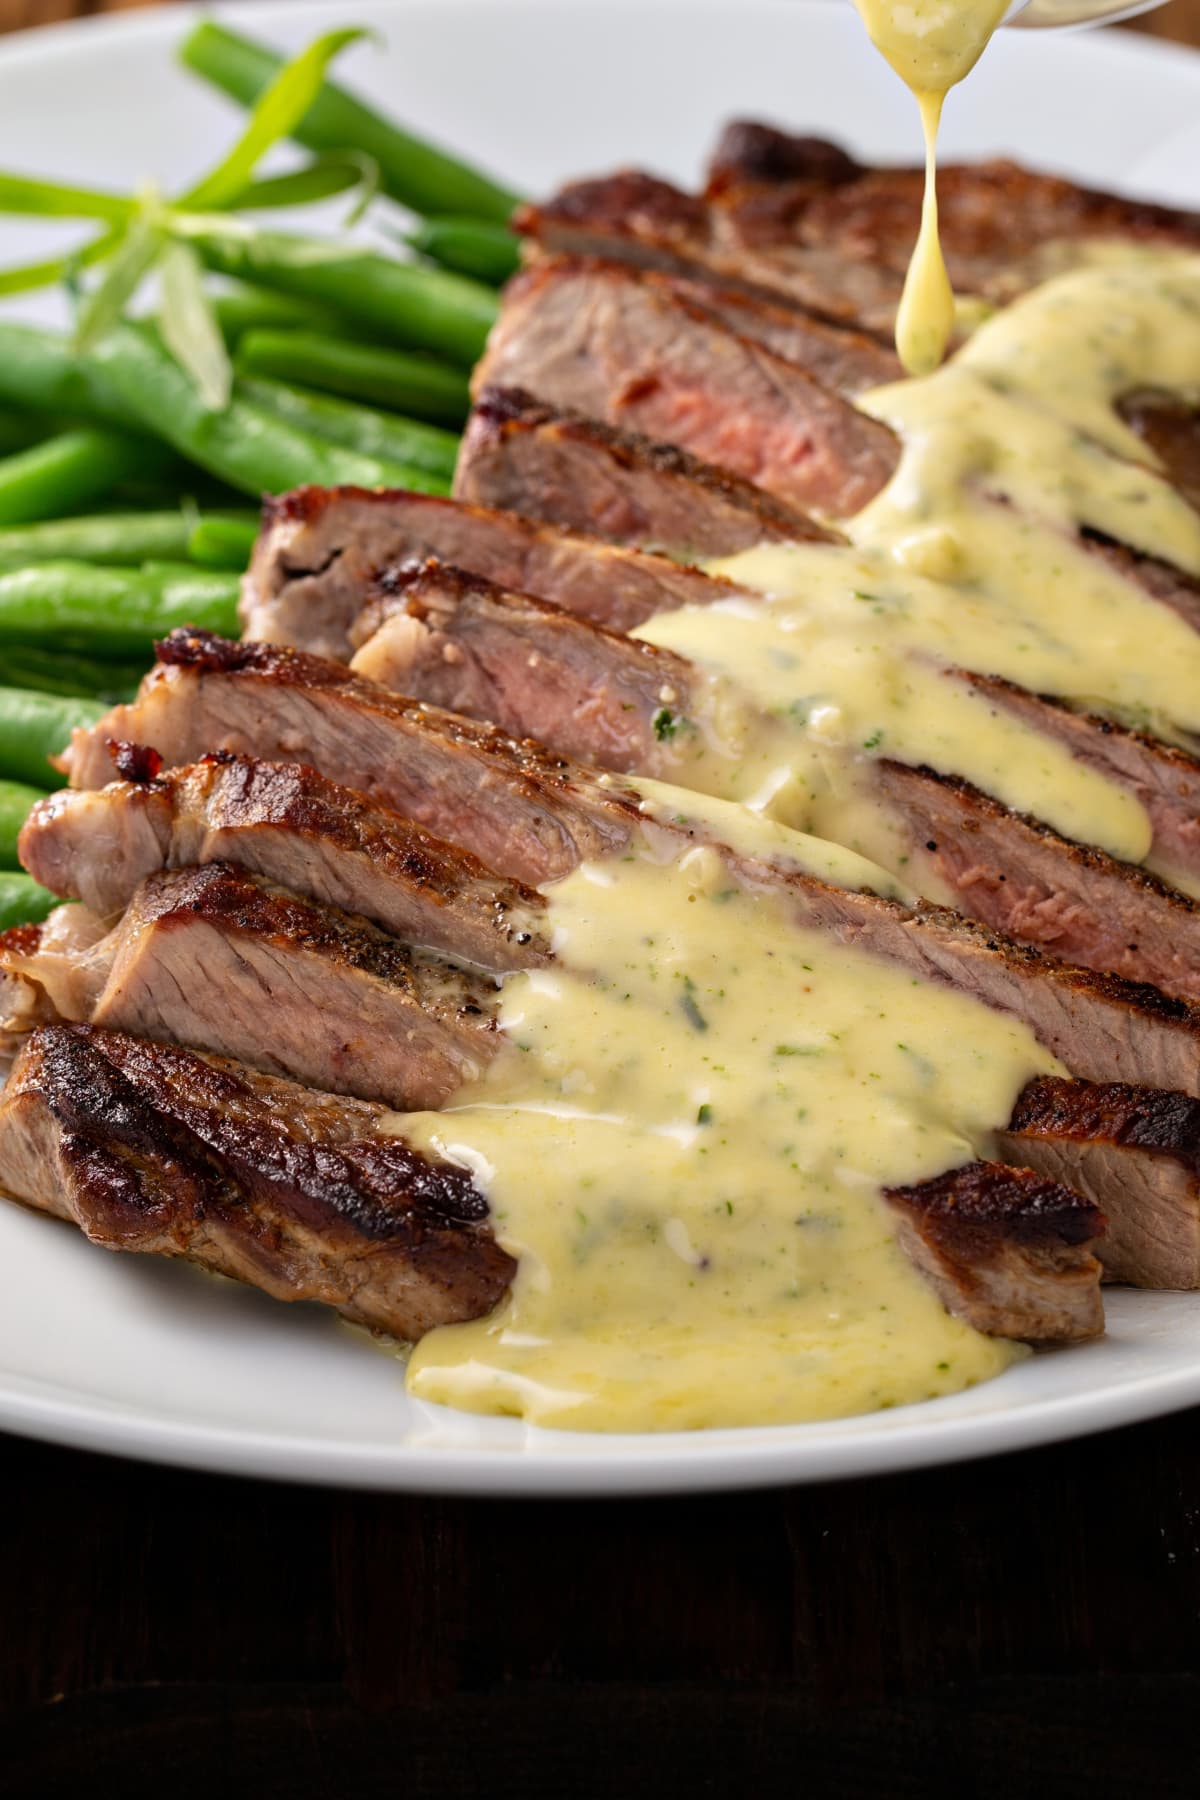 Steak with Béarnaise sauce made with tarragon